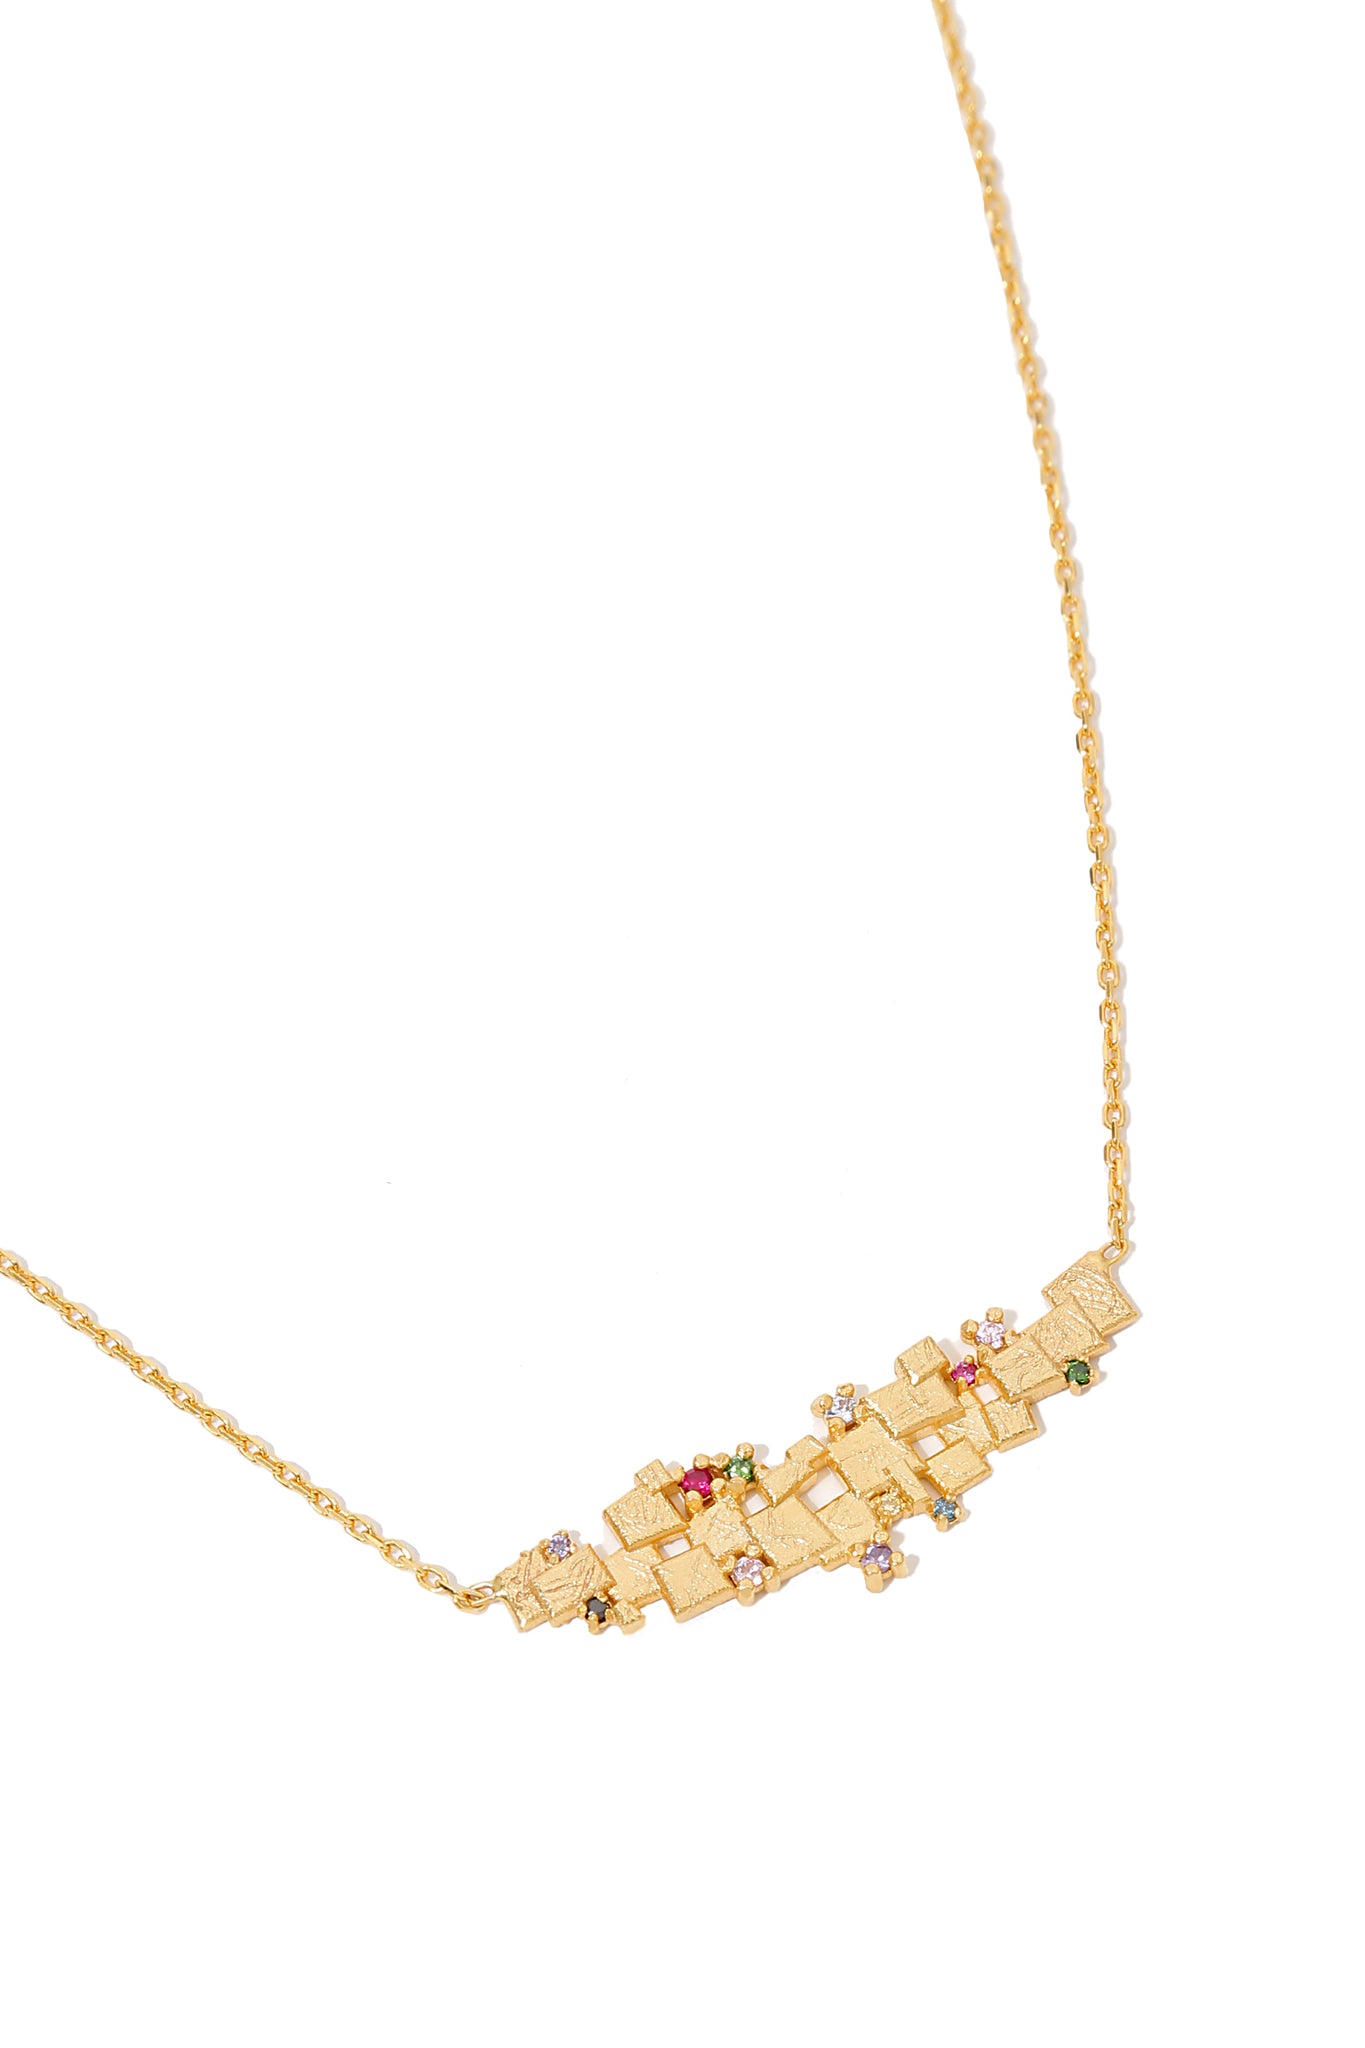 Mosaic Necklace with Natural Stones